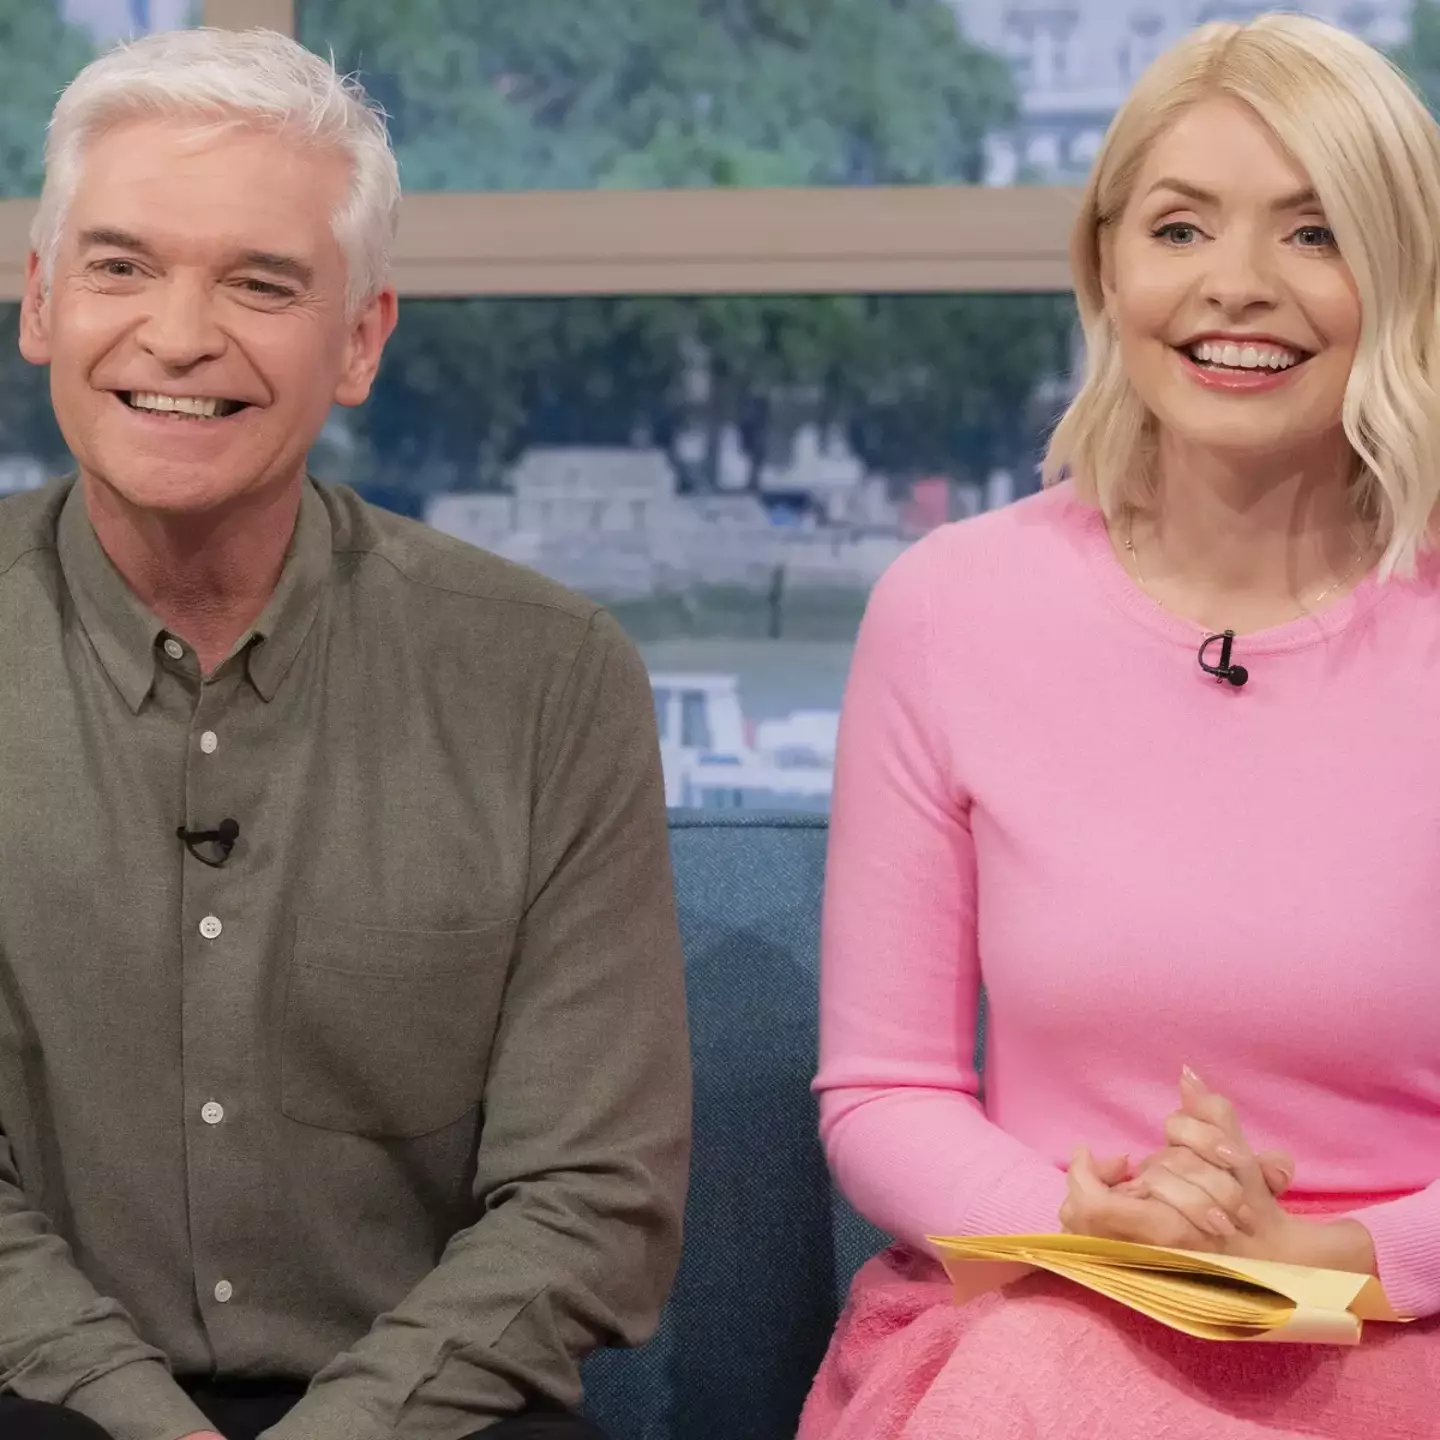 Rumours have been swirling about who could replace former lead presenters Holly and Phillip.